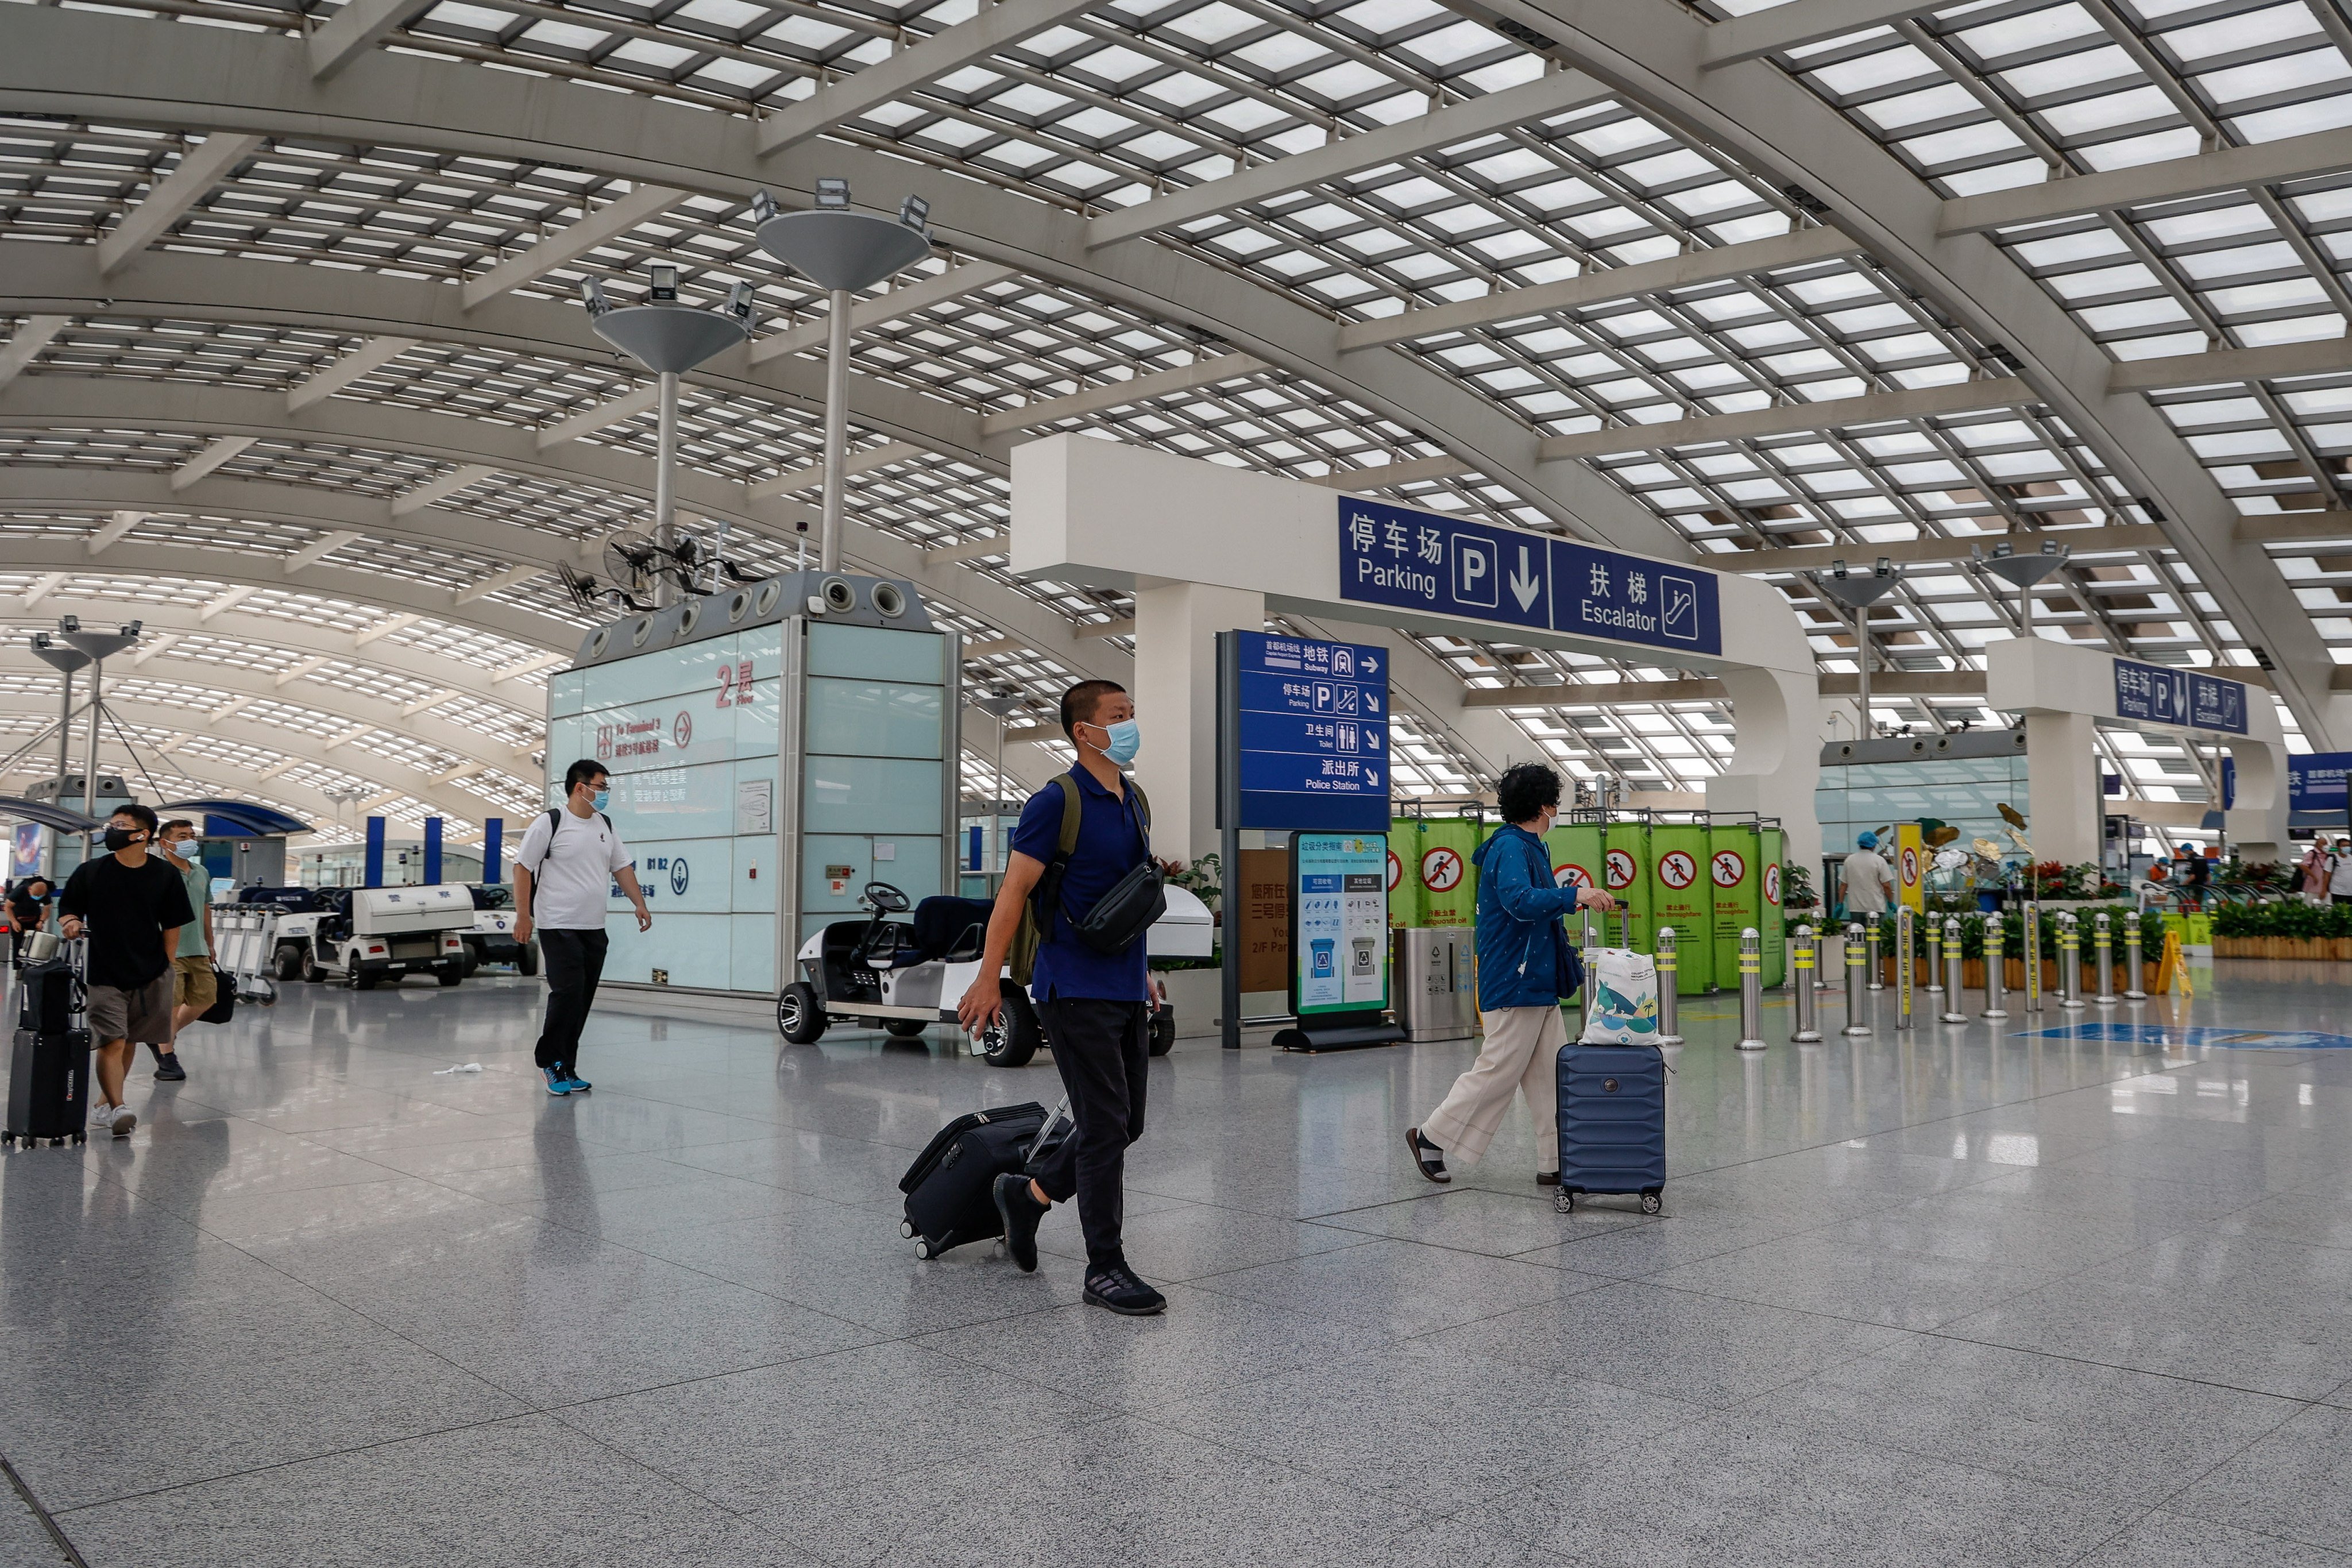 Fuel surcharges for domestic flights in mainland China have increased tenfold since February as oil prices have been rapidly rising globally. Photo: EPA-EFE